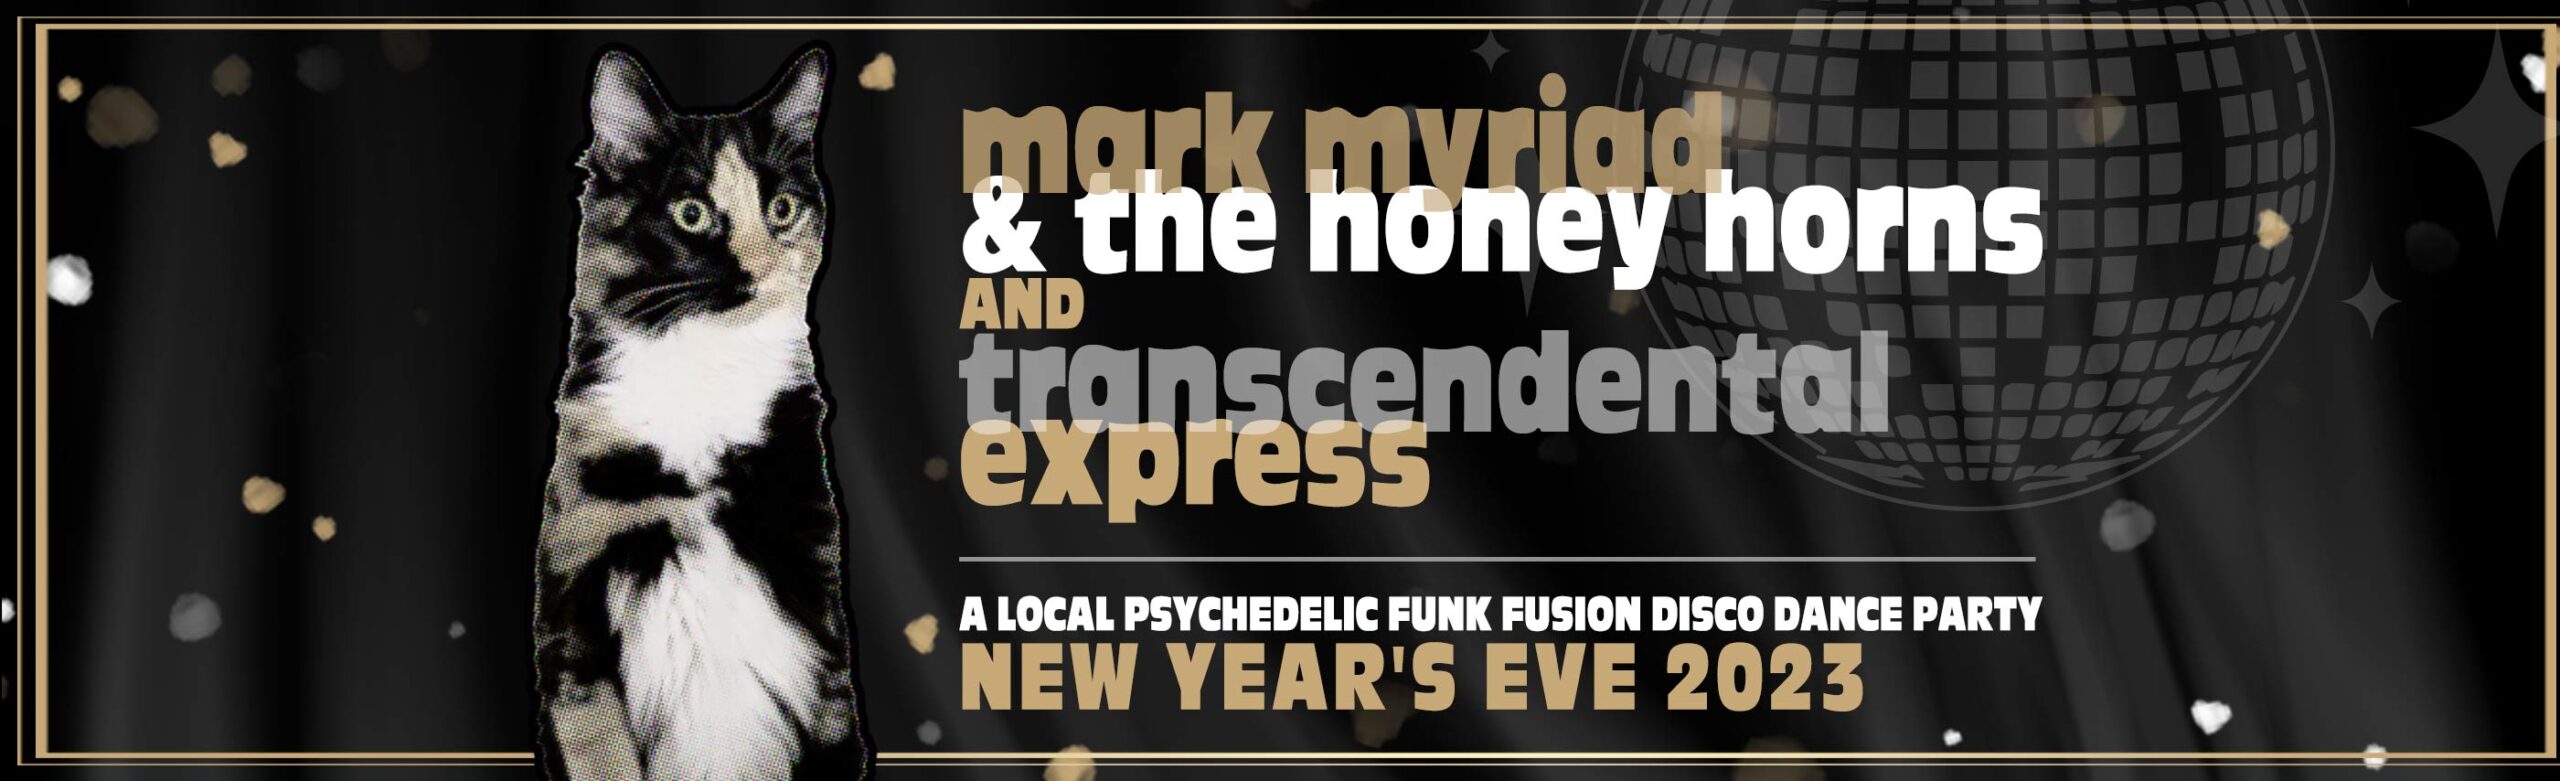 Top Hat Announces NYE Dance Party w/ Mark Myriad & The Honey Horns and Transcendental Express Image